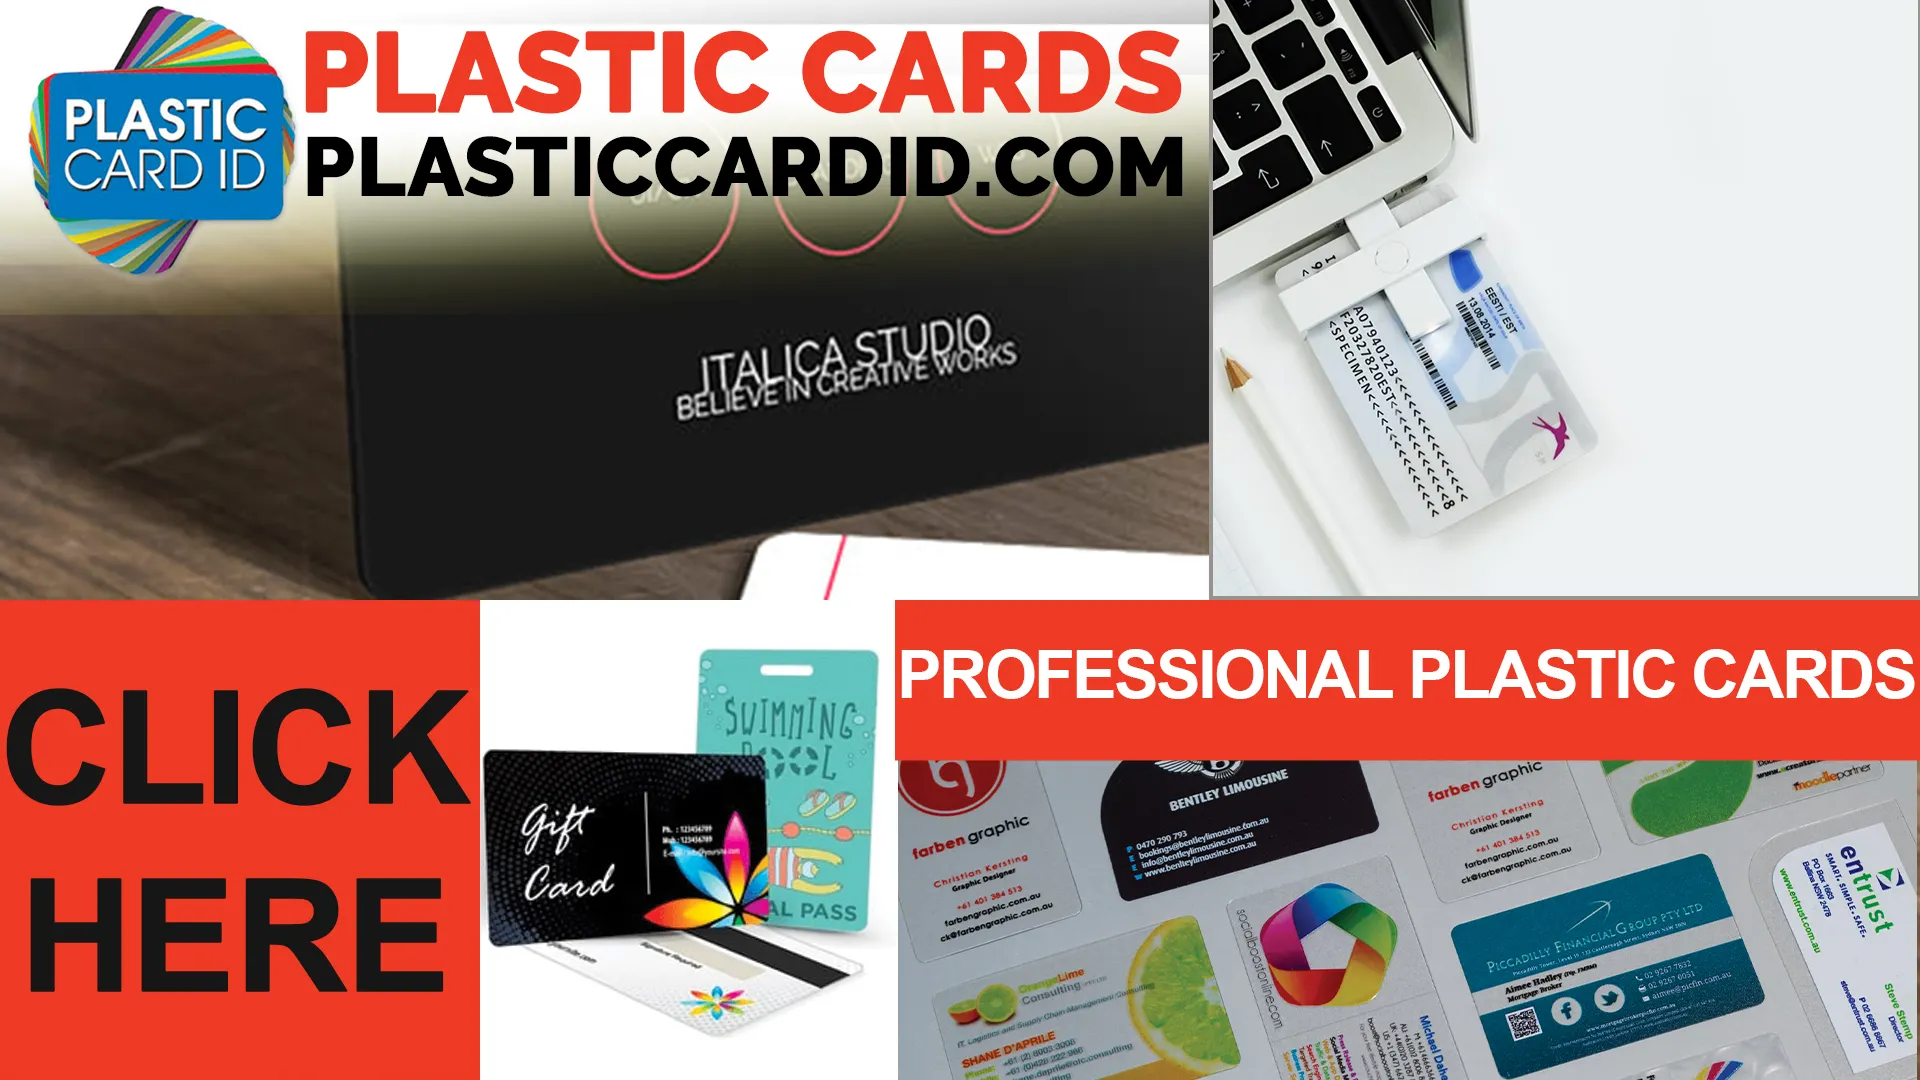 Plastic Card ID
: A Partner in Your Journey Towards Sustainable Practices